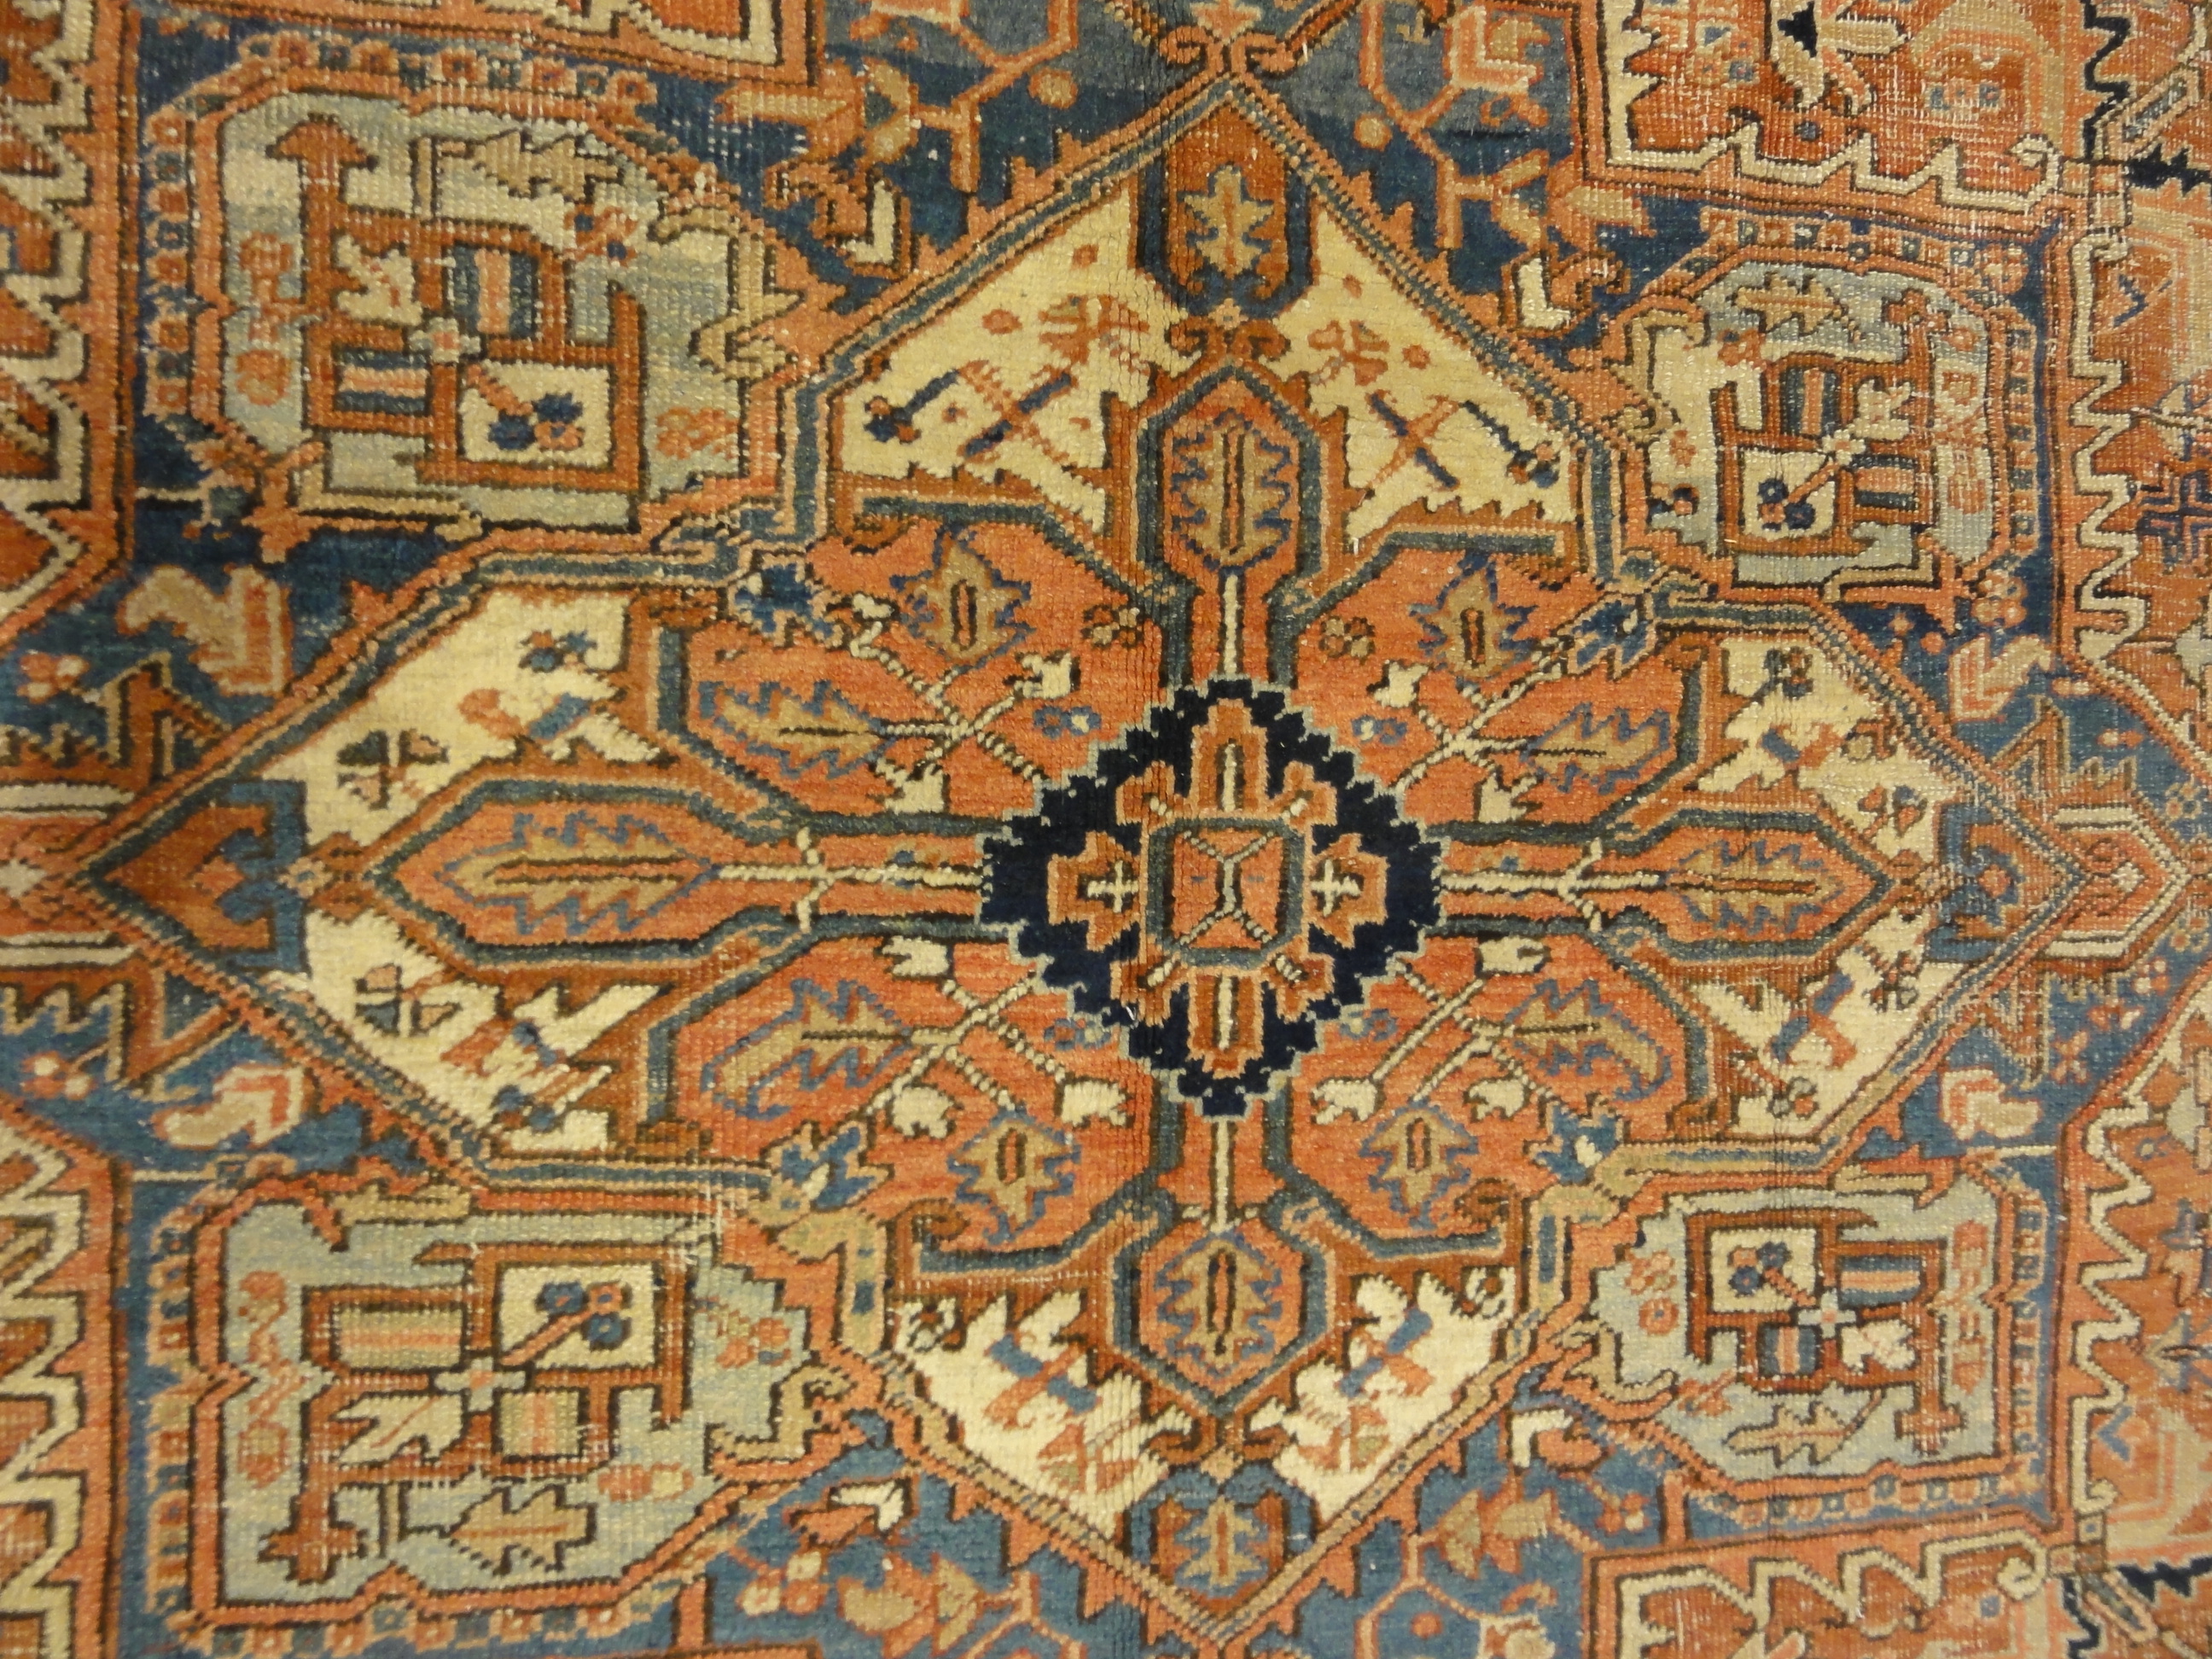 Antique Heriz Rug. A piece of genuine authentic antique woven carpet art sold by the Santa Barbara Design Center, Rugs and More.